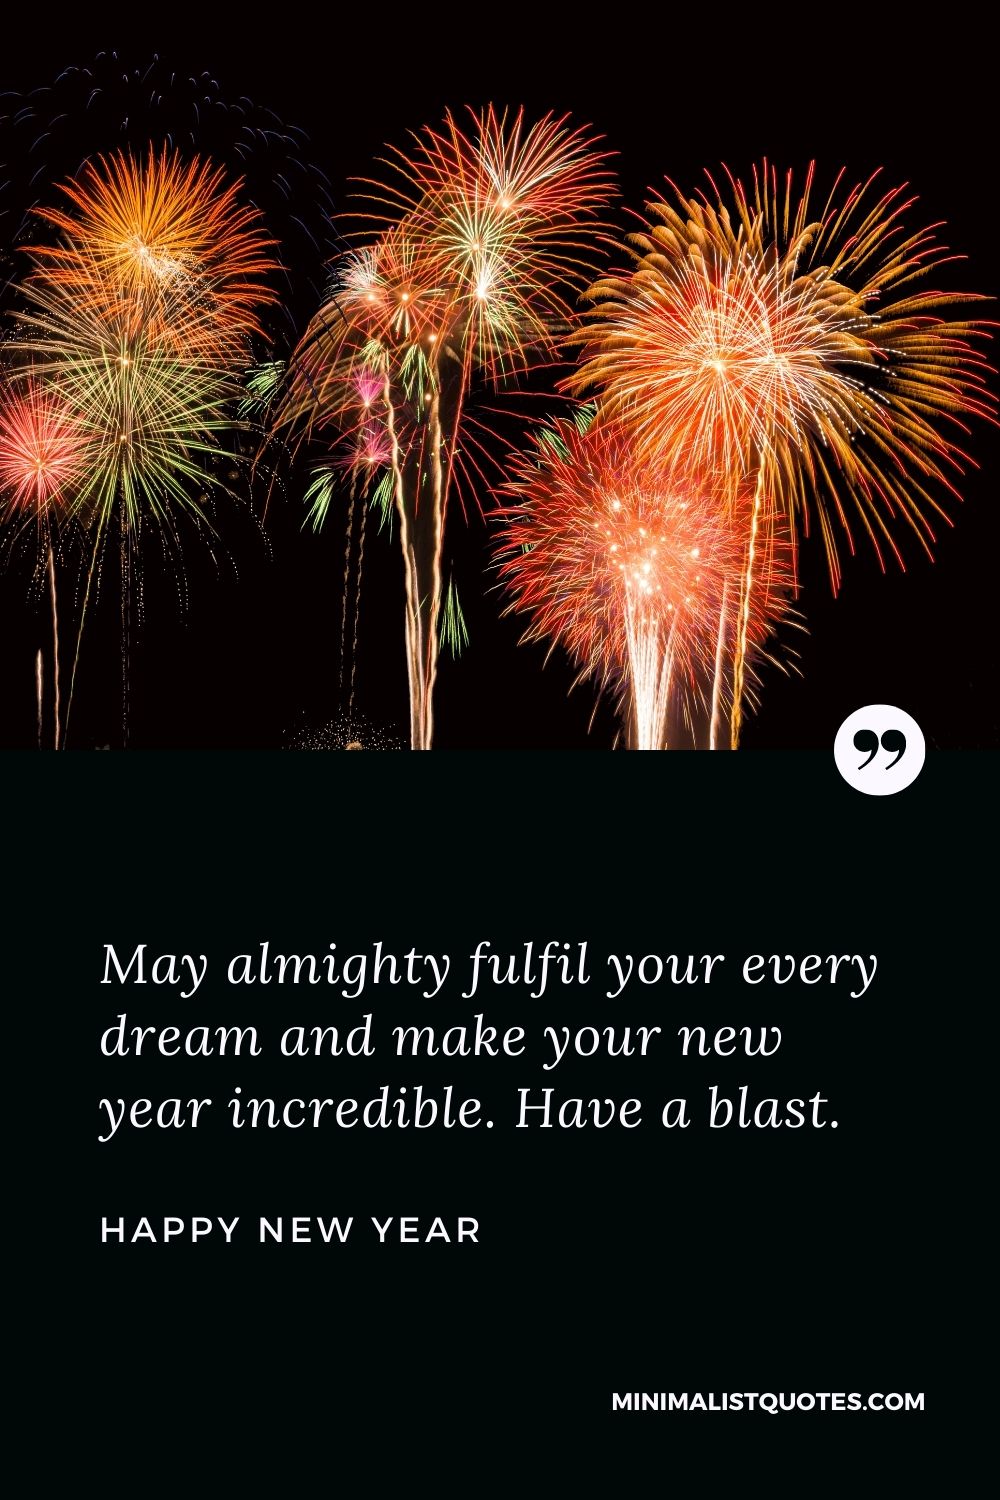 New Year Wish - May almighty fulfil your every dream and make your new year incredible. Have a blast.